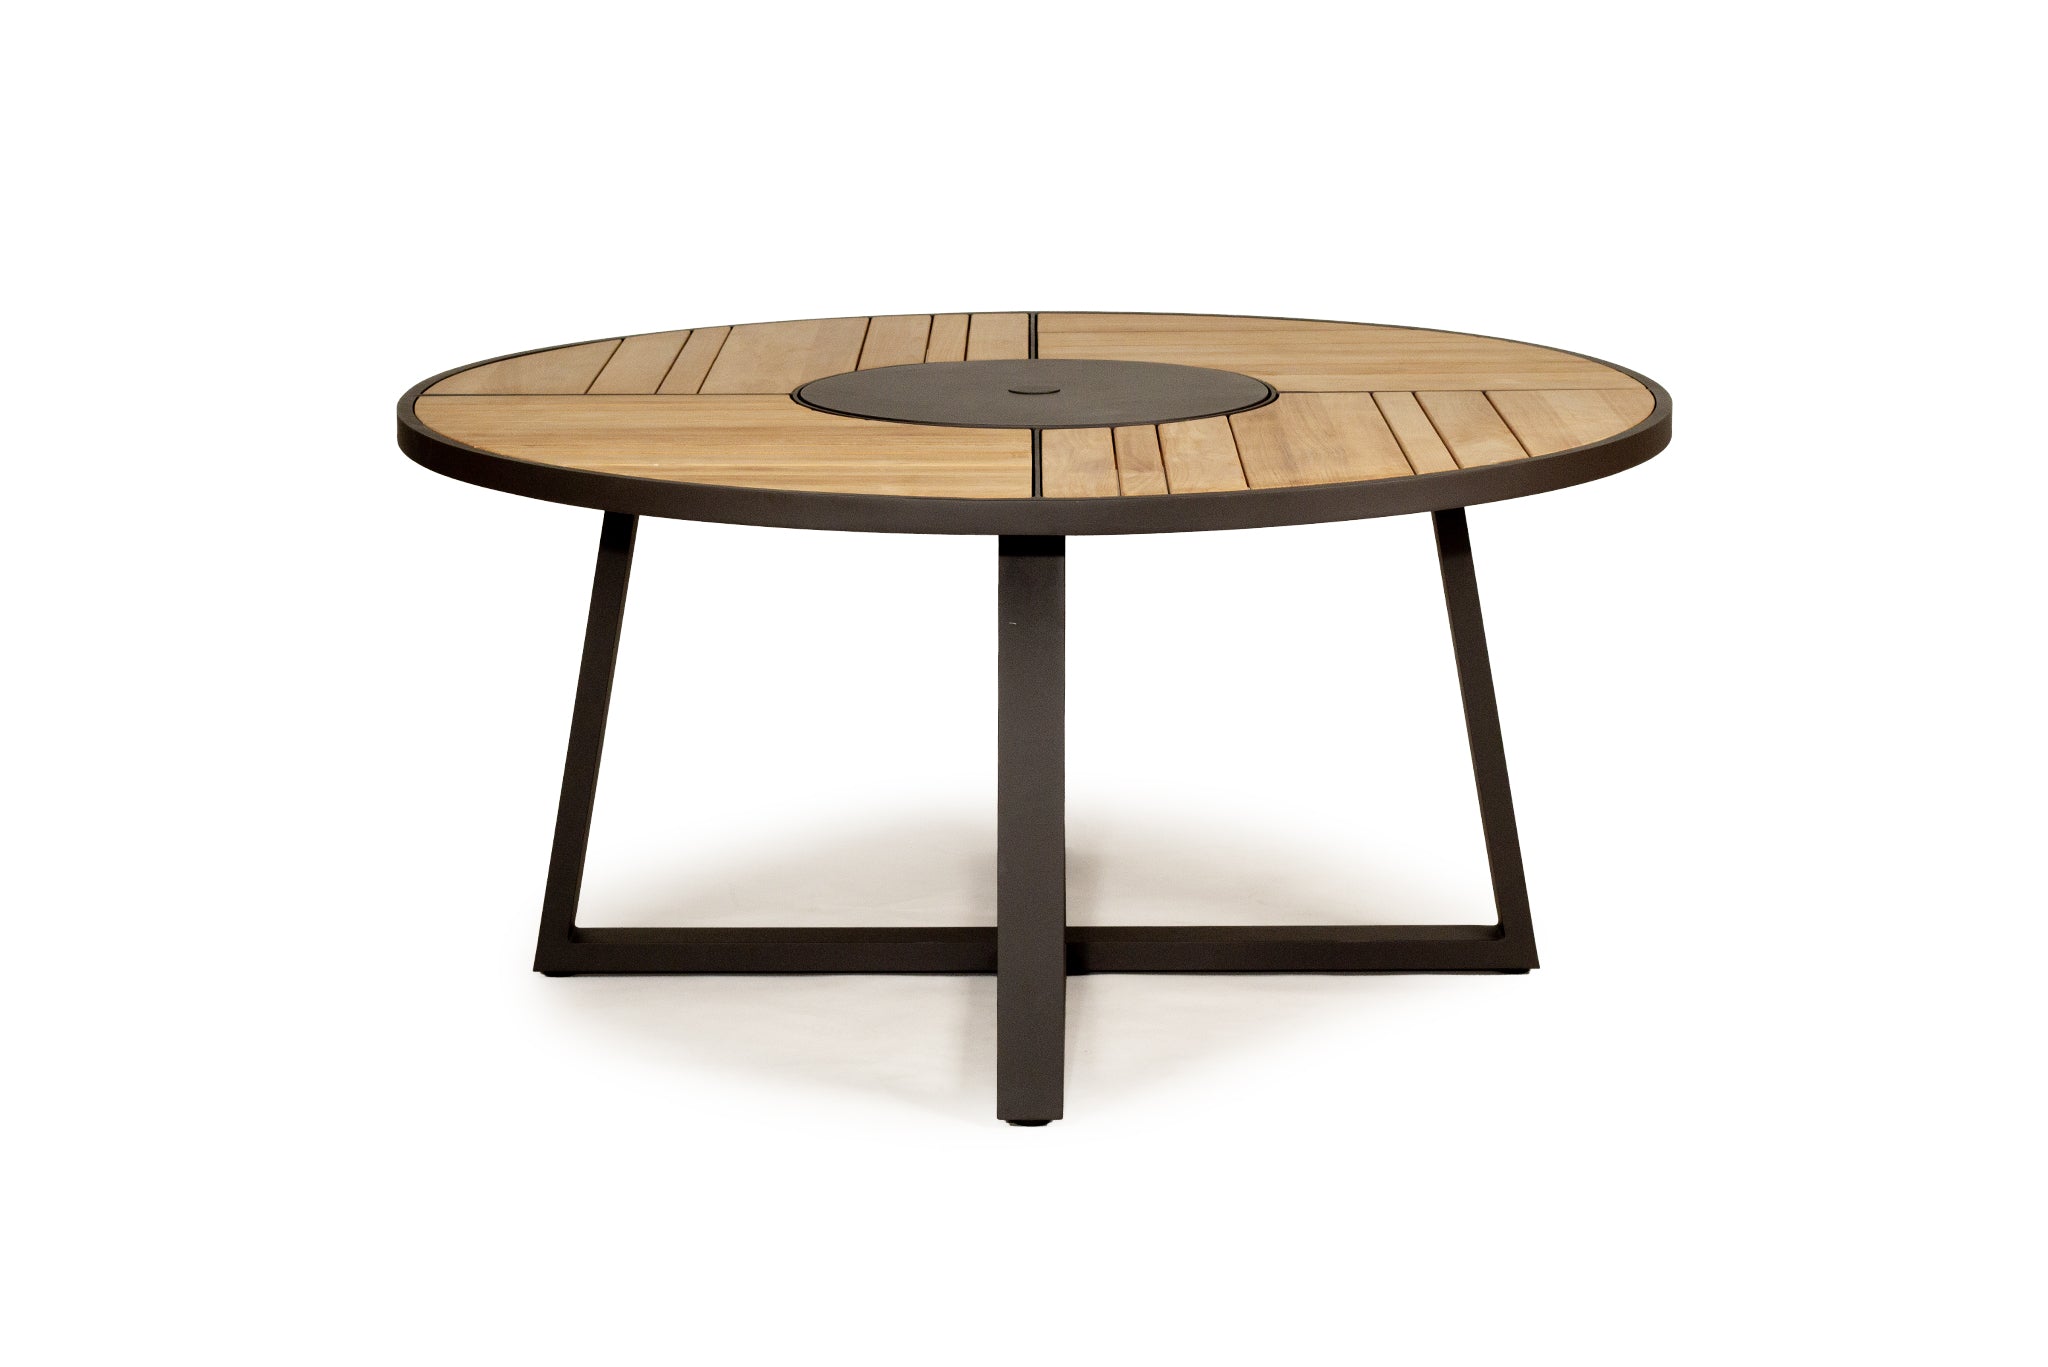 Fraser Outdoor Round Dining Table – 1.6m – Asteroid Black (Charcoal) Powder Coated Legs